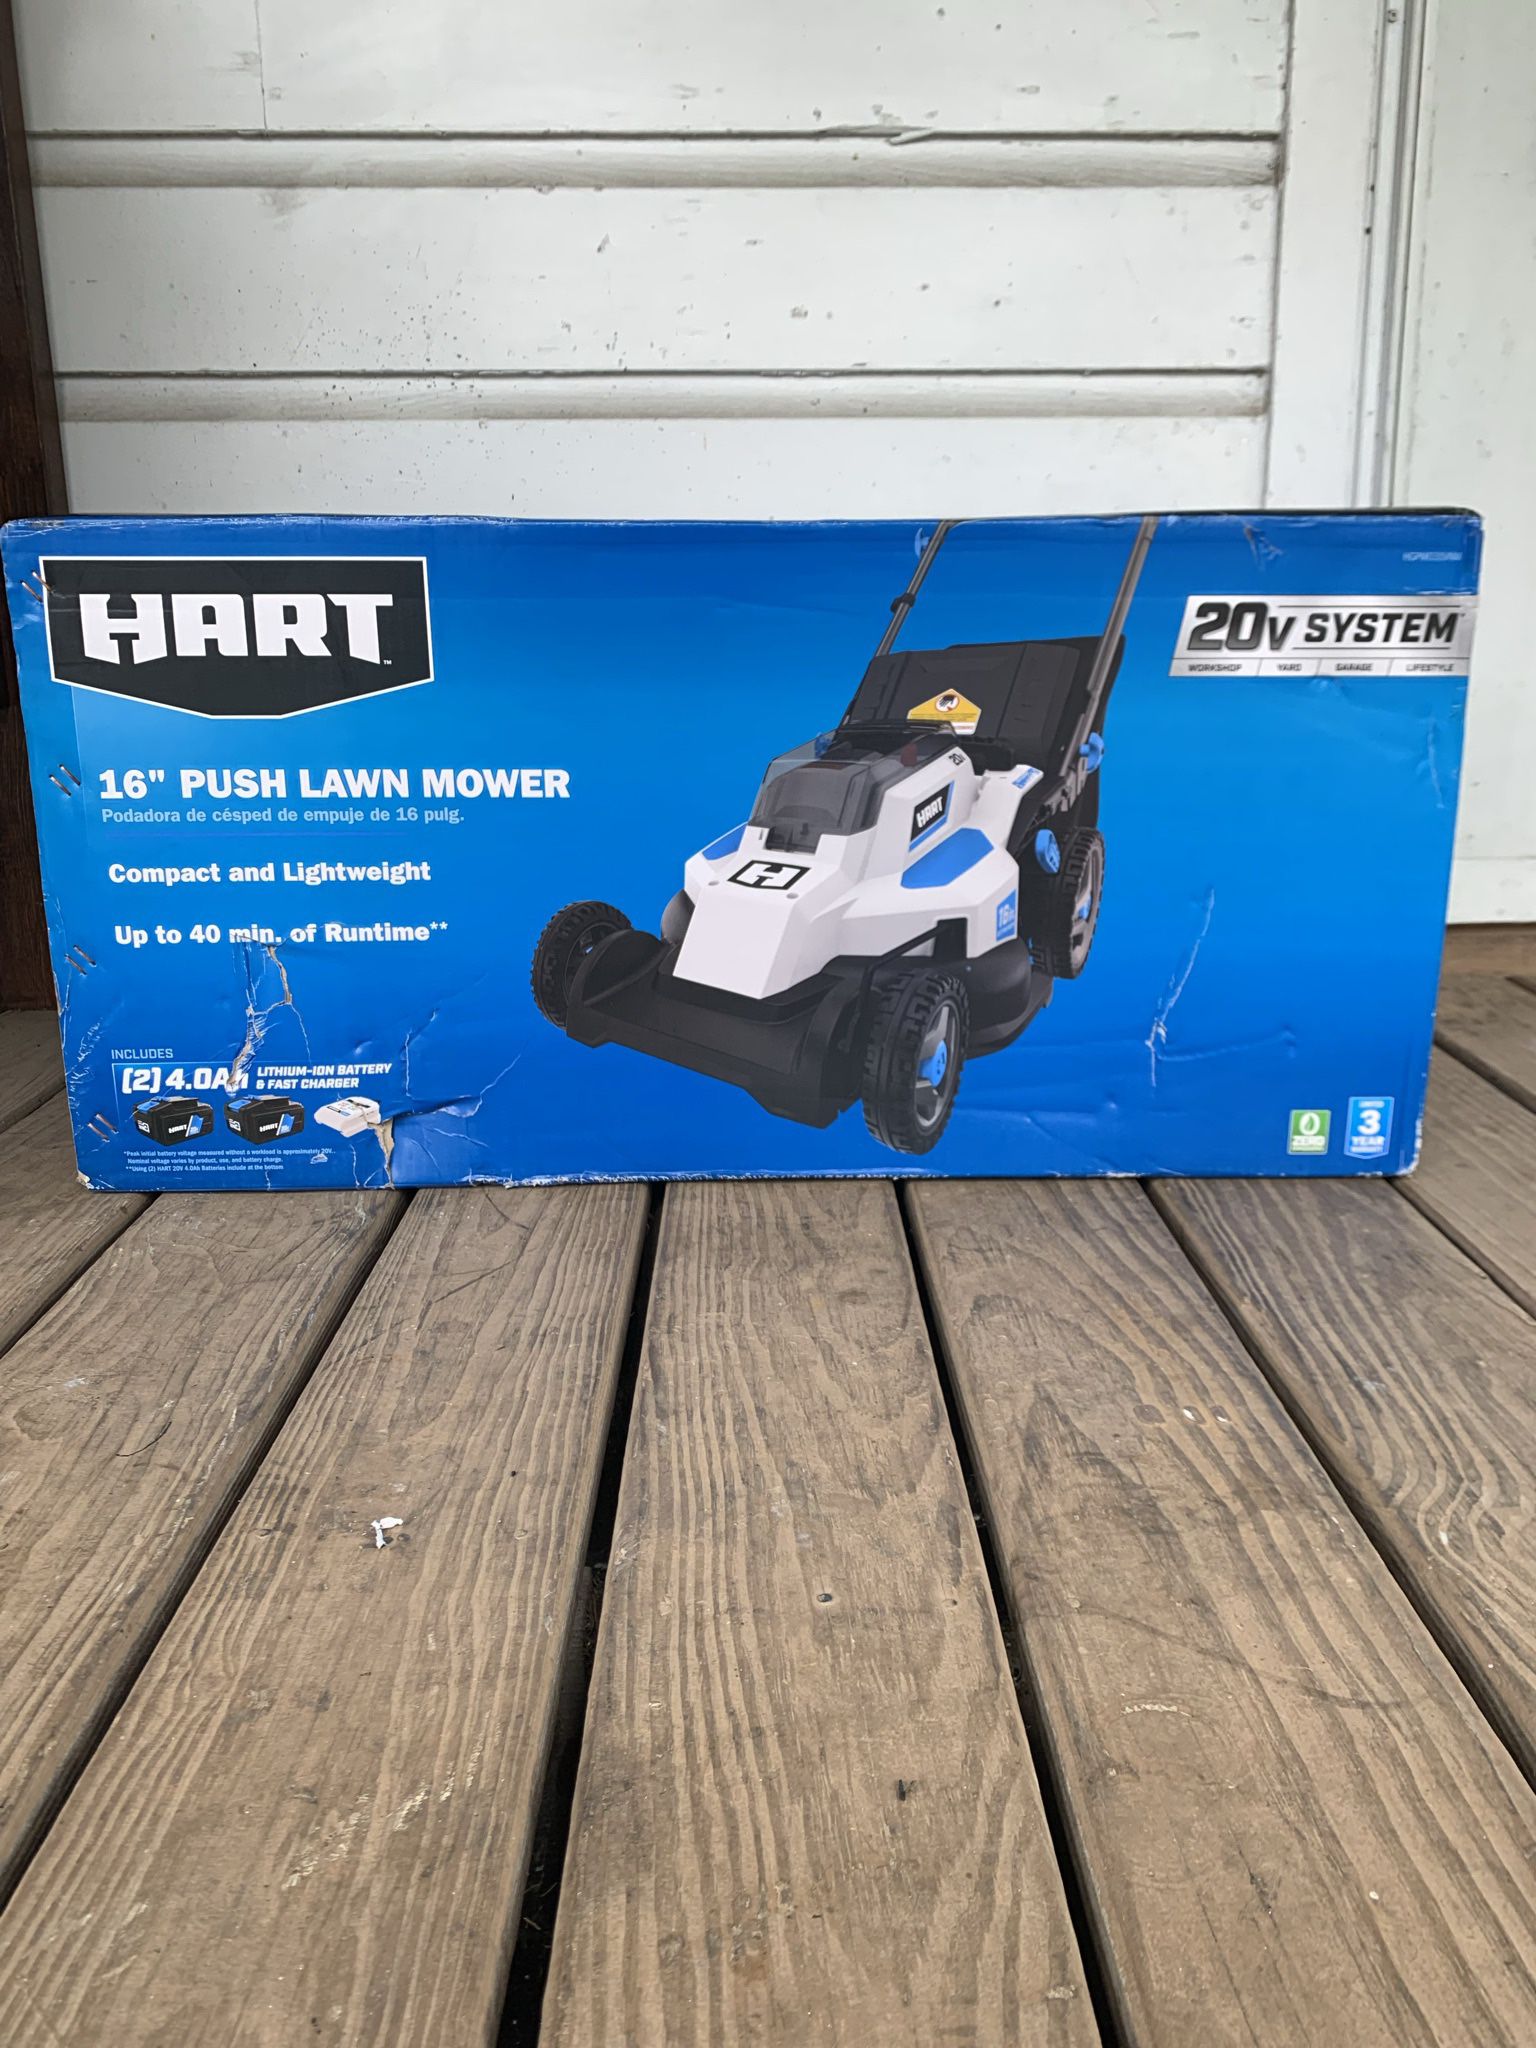 Hart 16” Electric Lawn Mower New & Factory Sealed